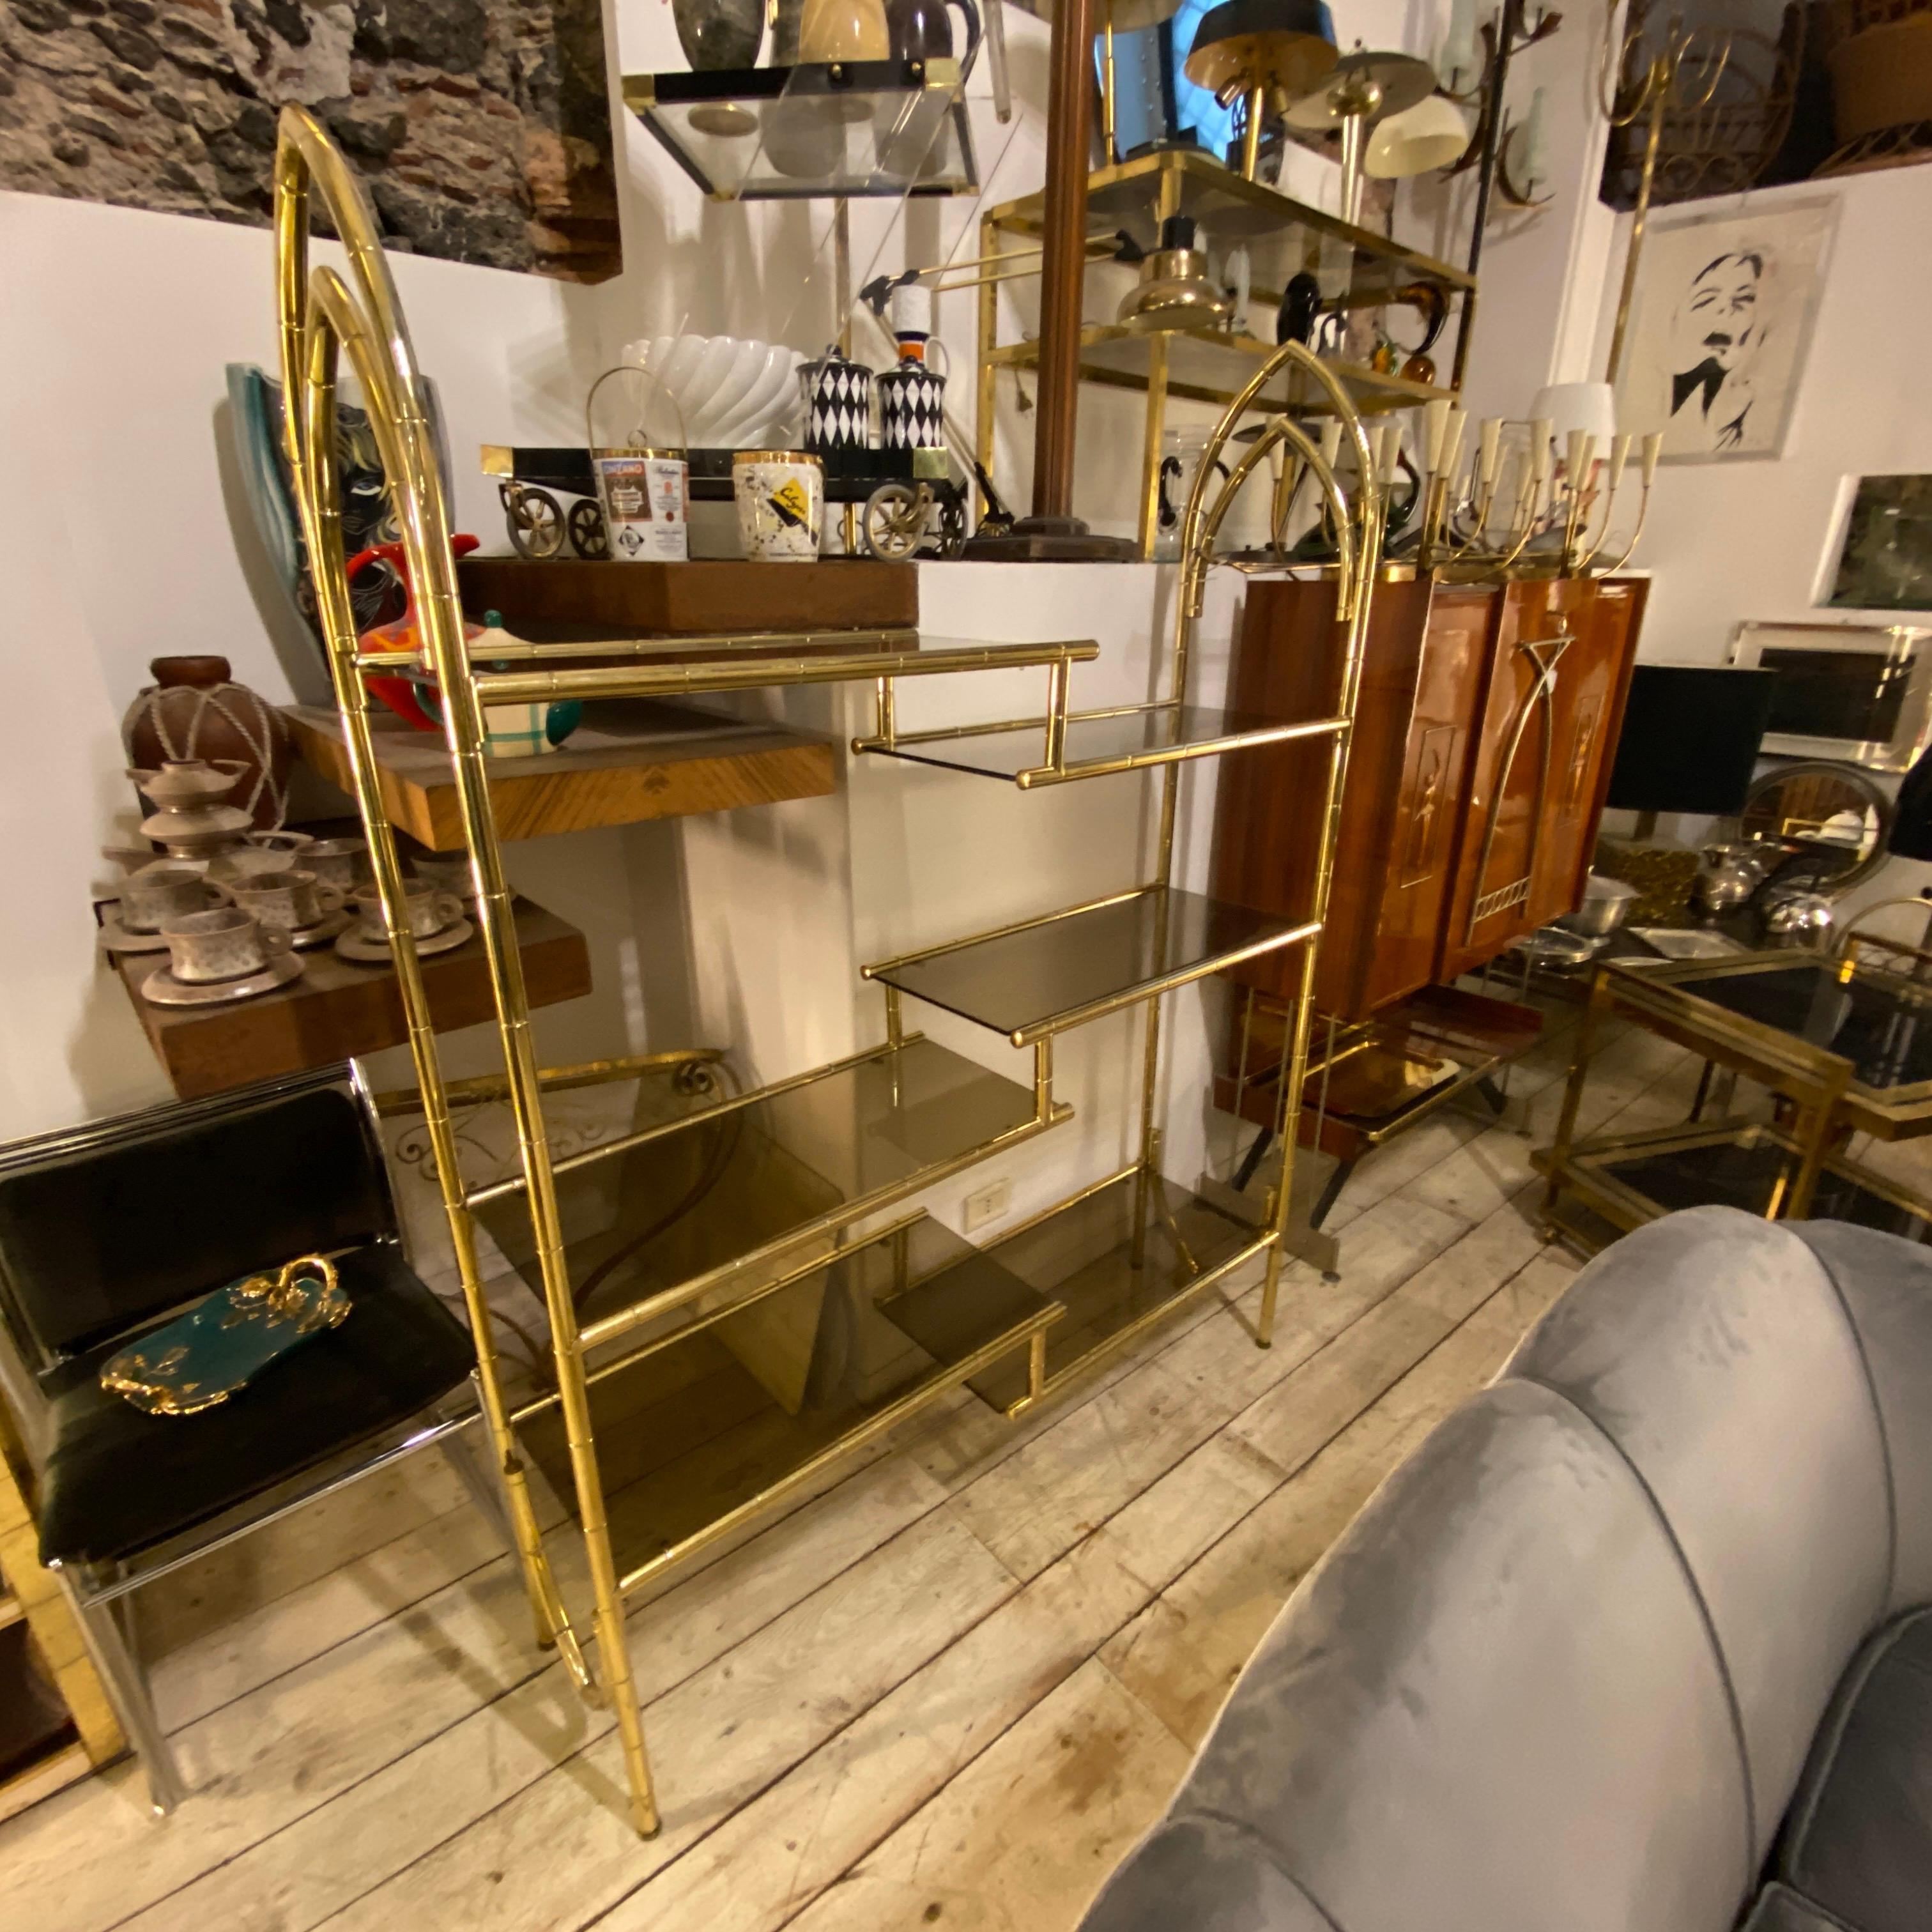 A solid brass bookcase designed and manufactured in Italy the Sixties. The brass has worked like bamboo and it's in original patina. This Bookcase is a sleek and stylish piece of vintage furniture. It is designed in the mid-century modern style,